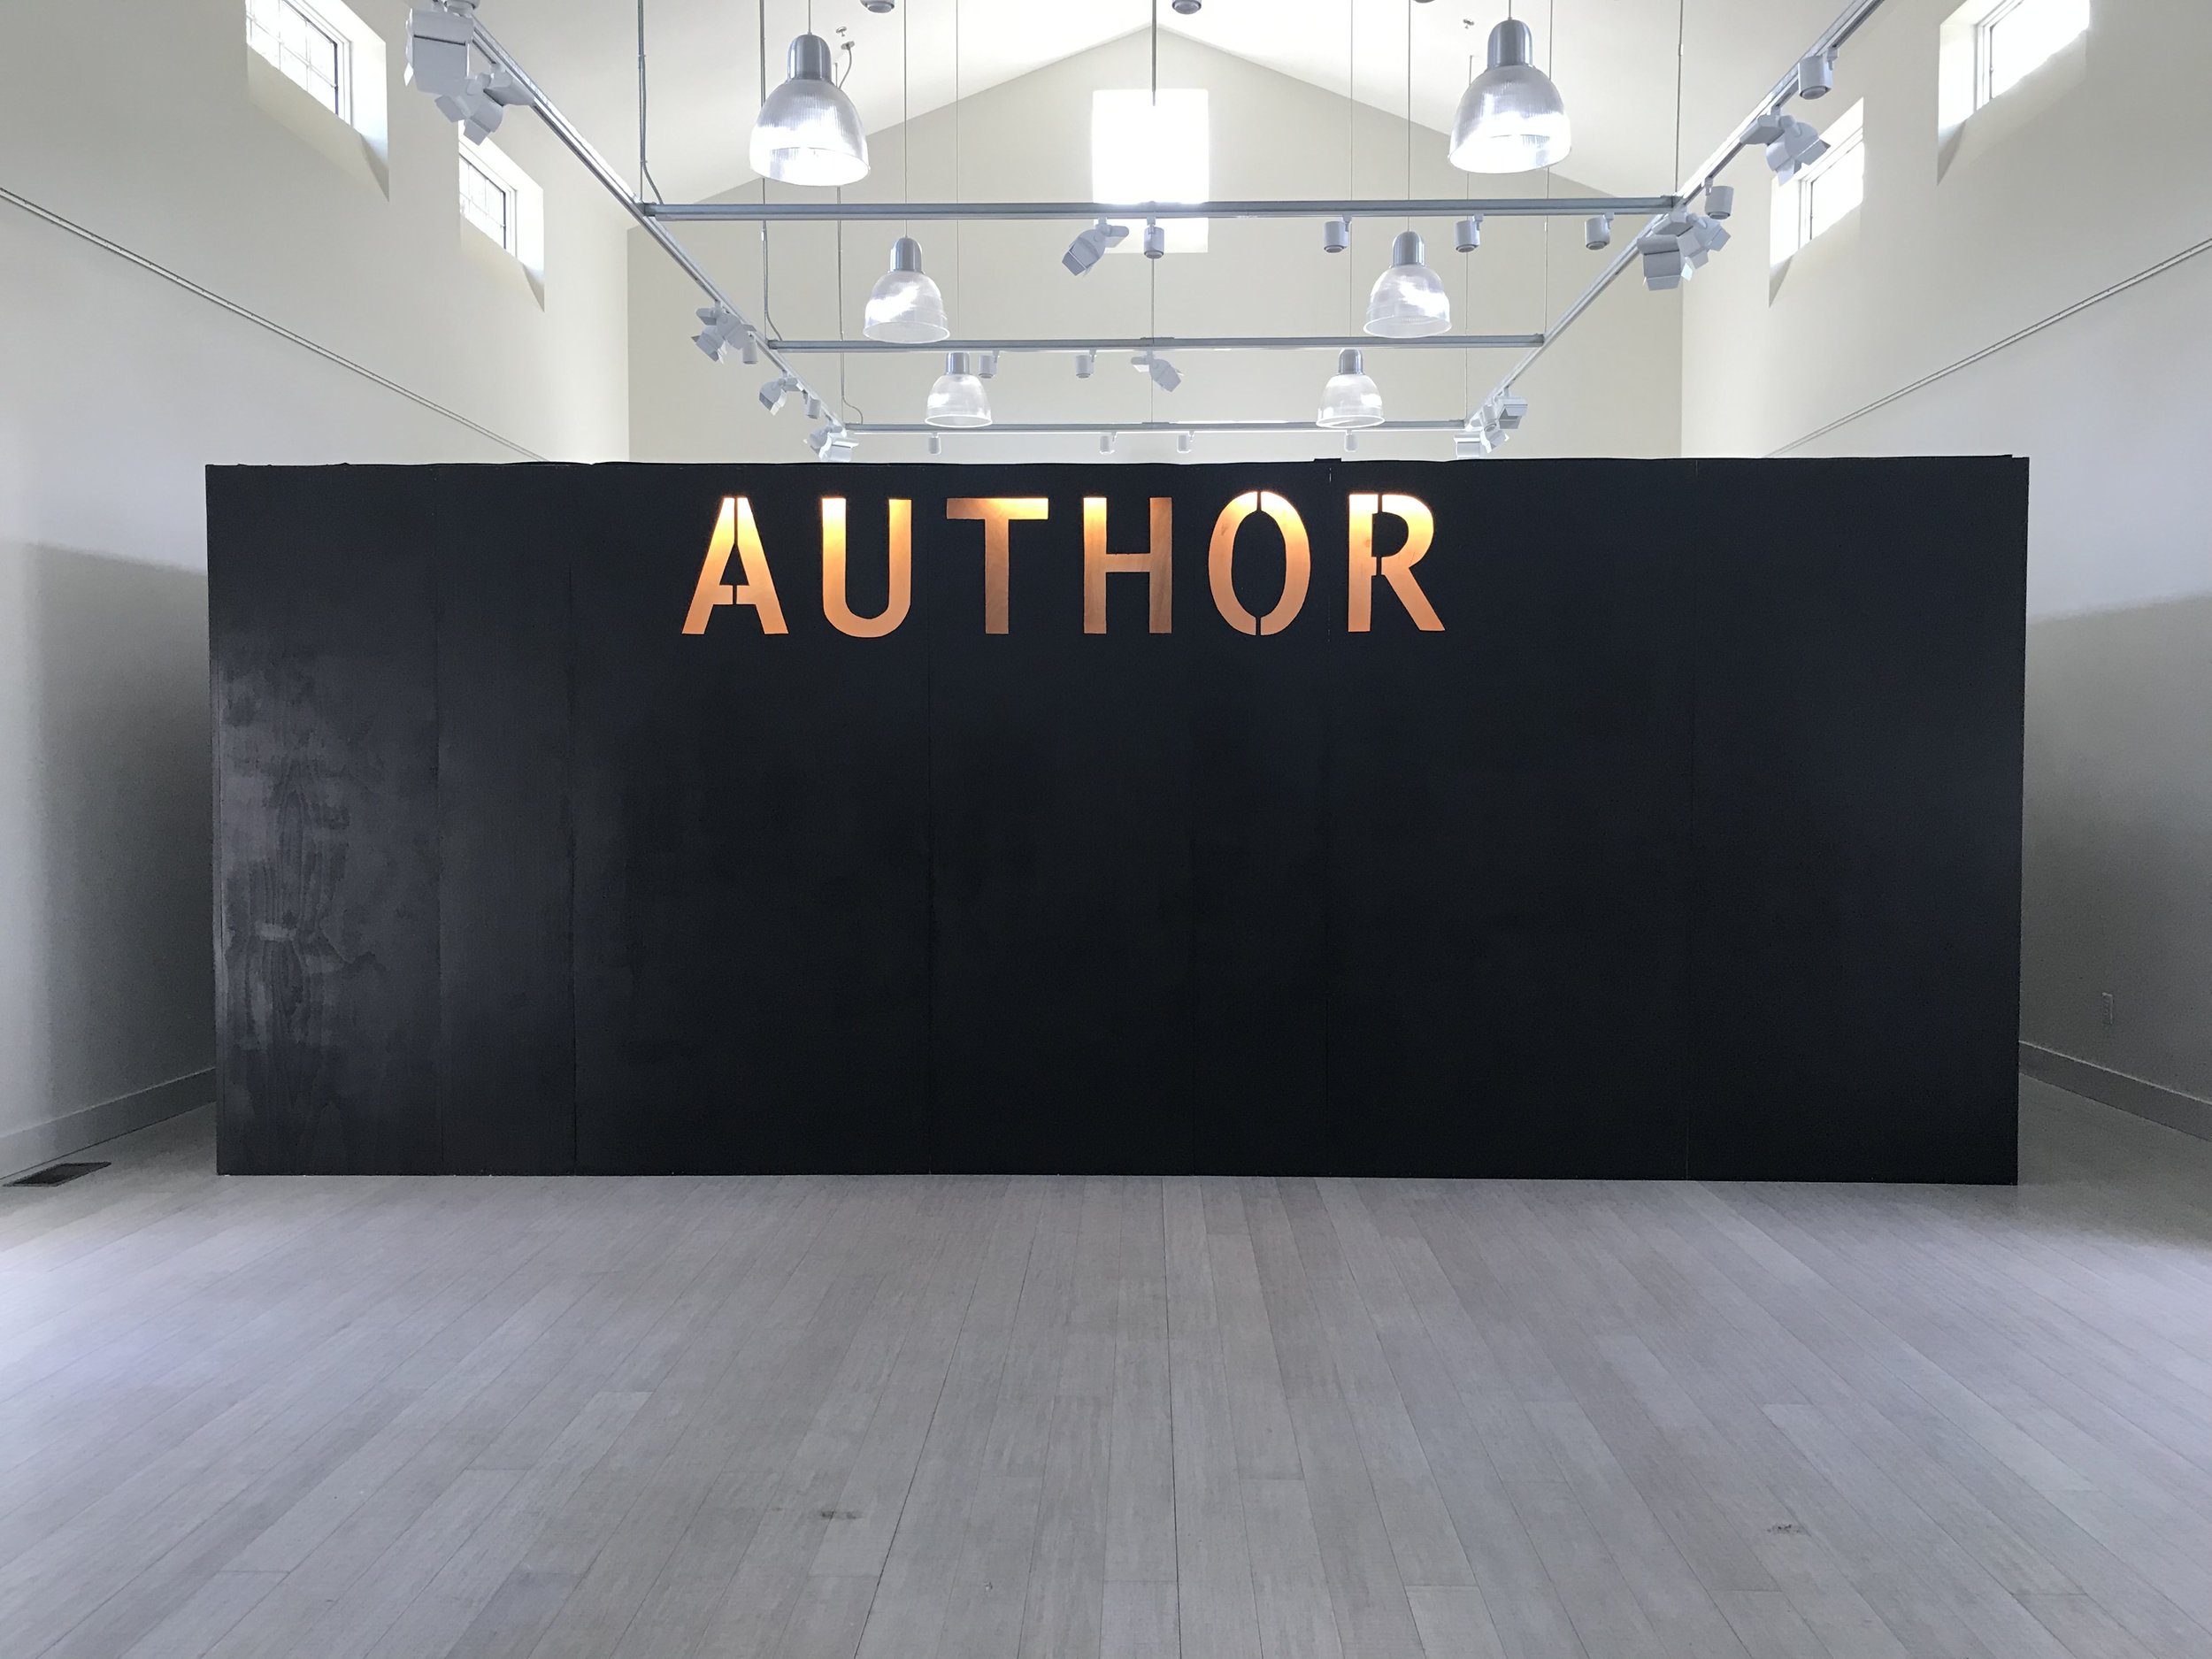 An exterior view of the installation – a simple black building with letters of “Author” carved into the side stands inside a white gallery space with vaulted ceilings.